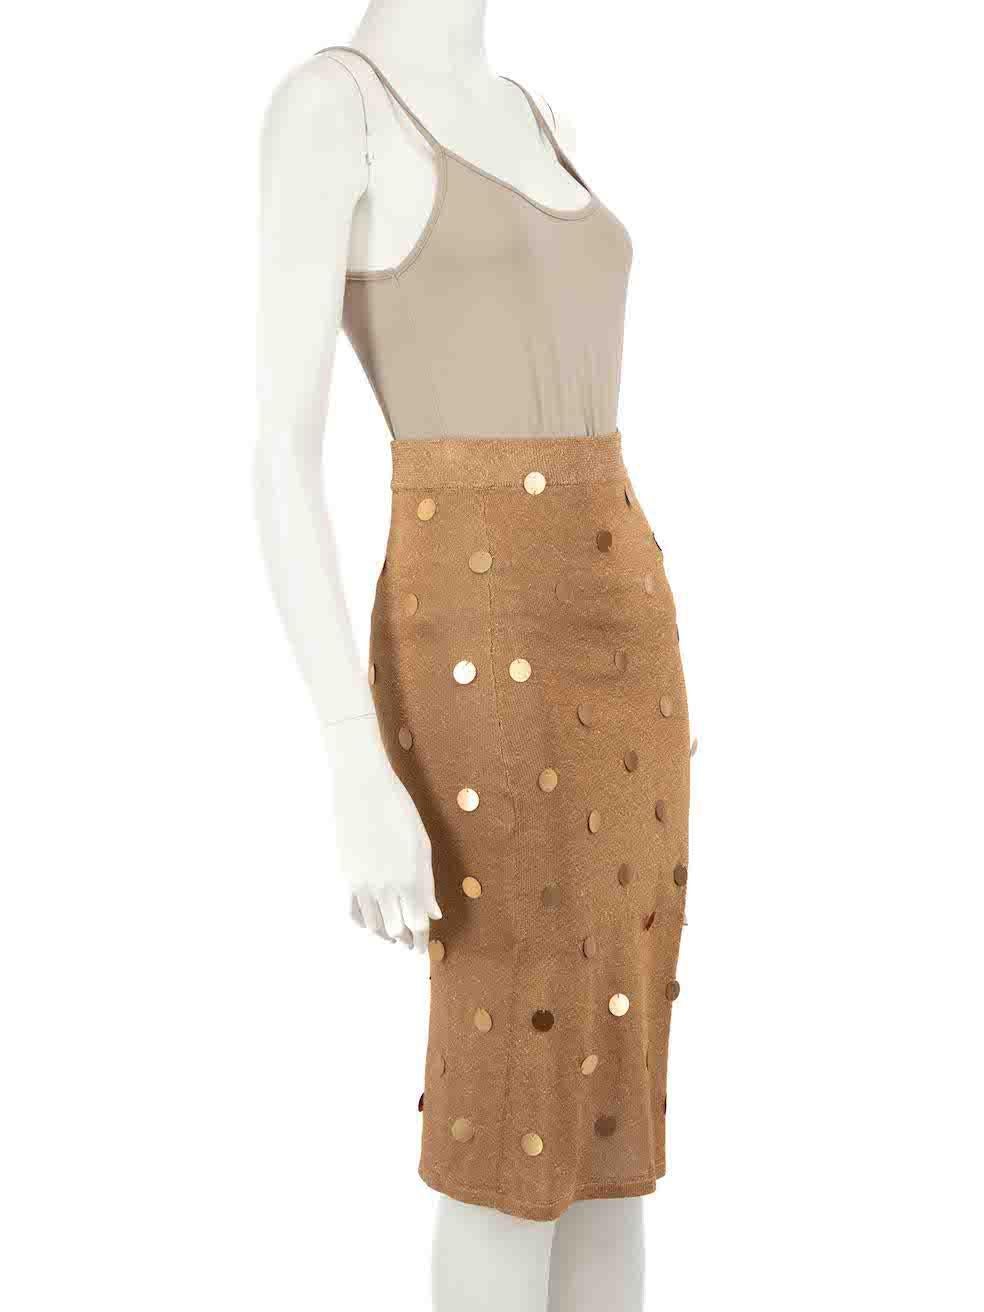 CONDITION is Very good. Hardly any visible wear to skirt is evident on this used House of Harlow 1960 x Revolve designer resale item.
 
 
 
 Details
 
 
 Gold
 
 Synthetic
 
 Knit skirt
 
 Midi
 
 Sequinned
 
 Elasticated waistband
 
 Front leg